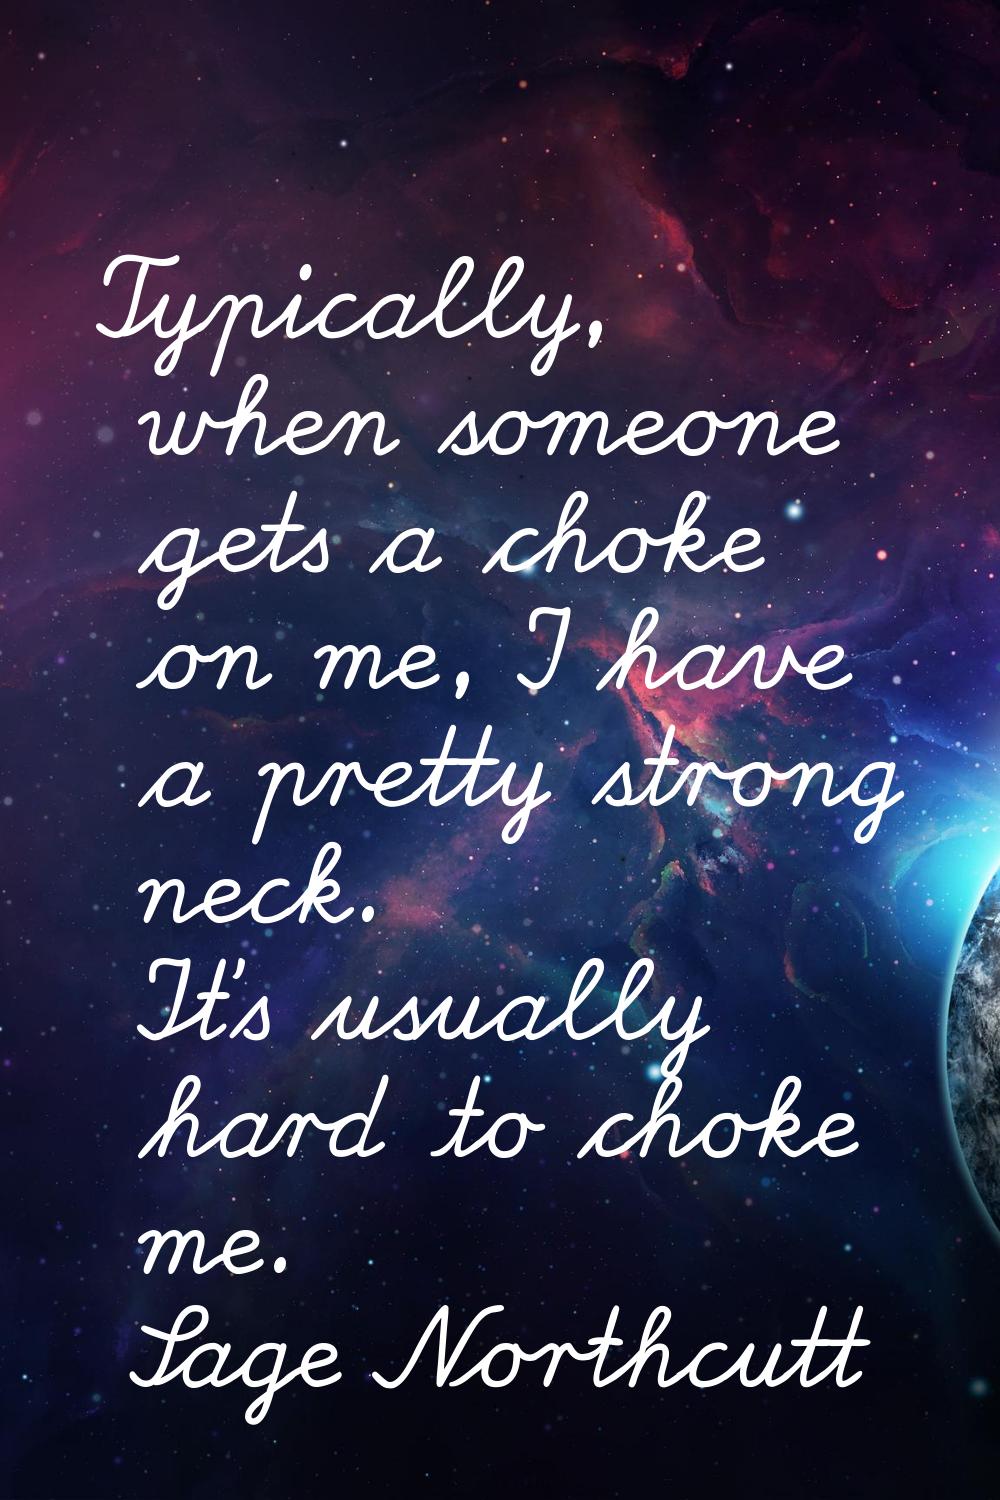 Typically, when someone gets a choke on me, I have a pretty strong neck. It's usually hard to choke